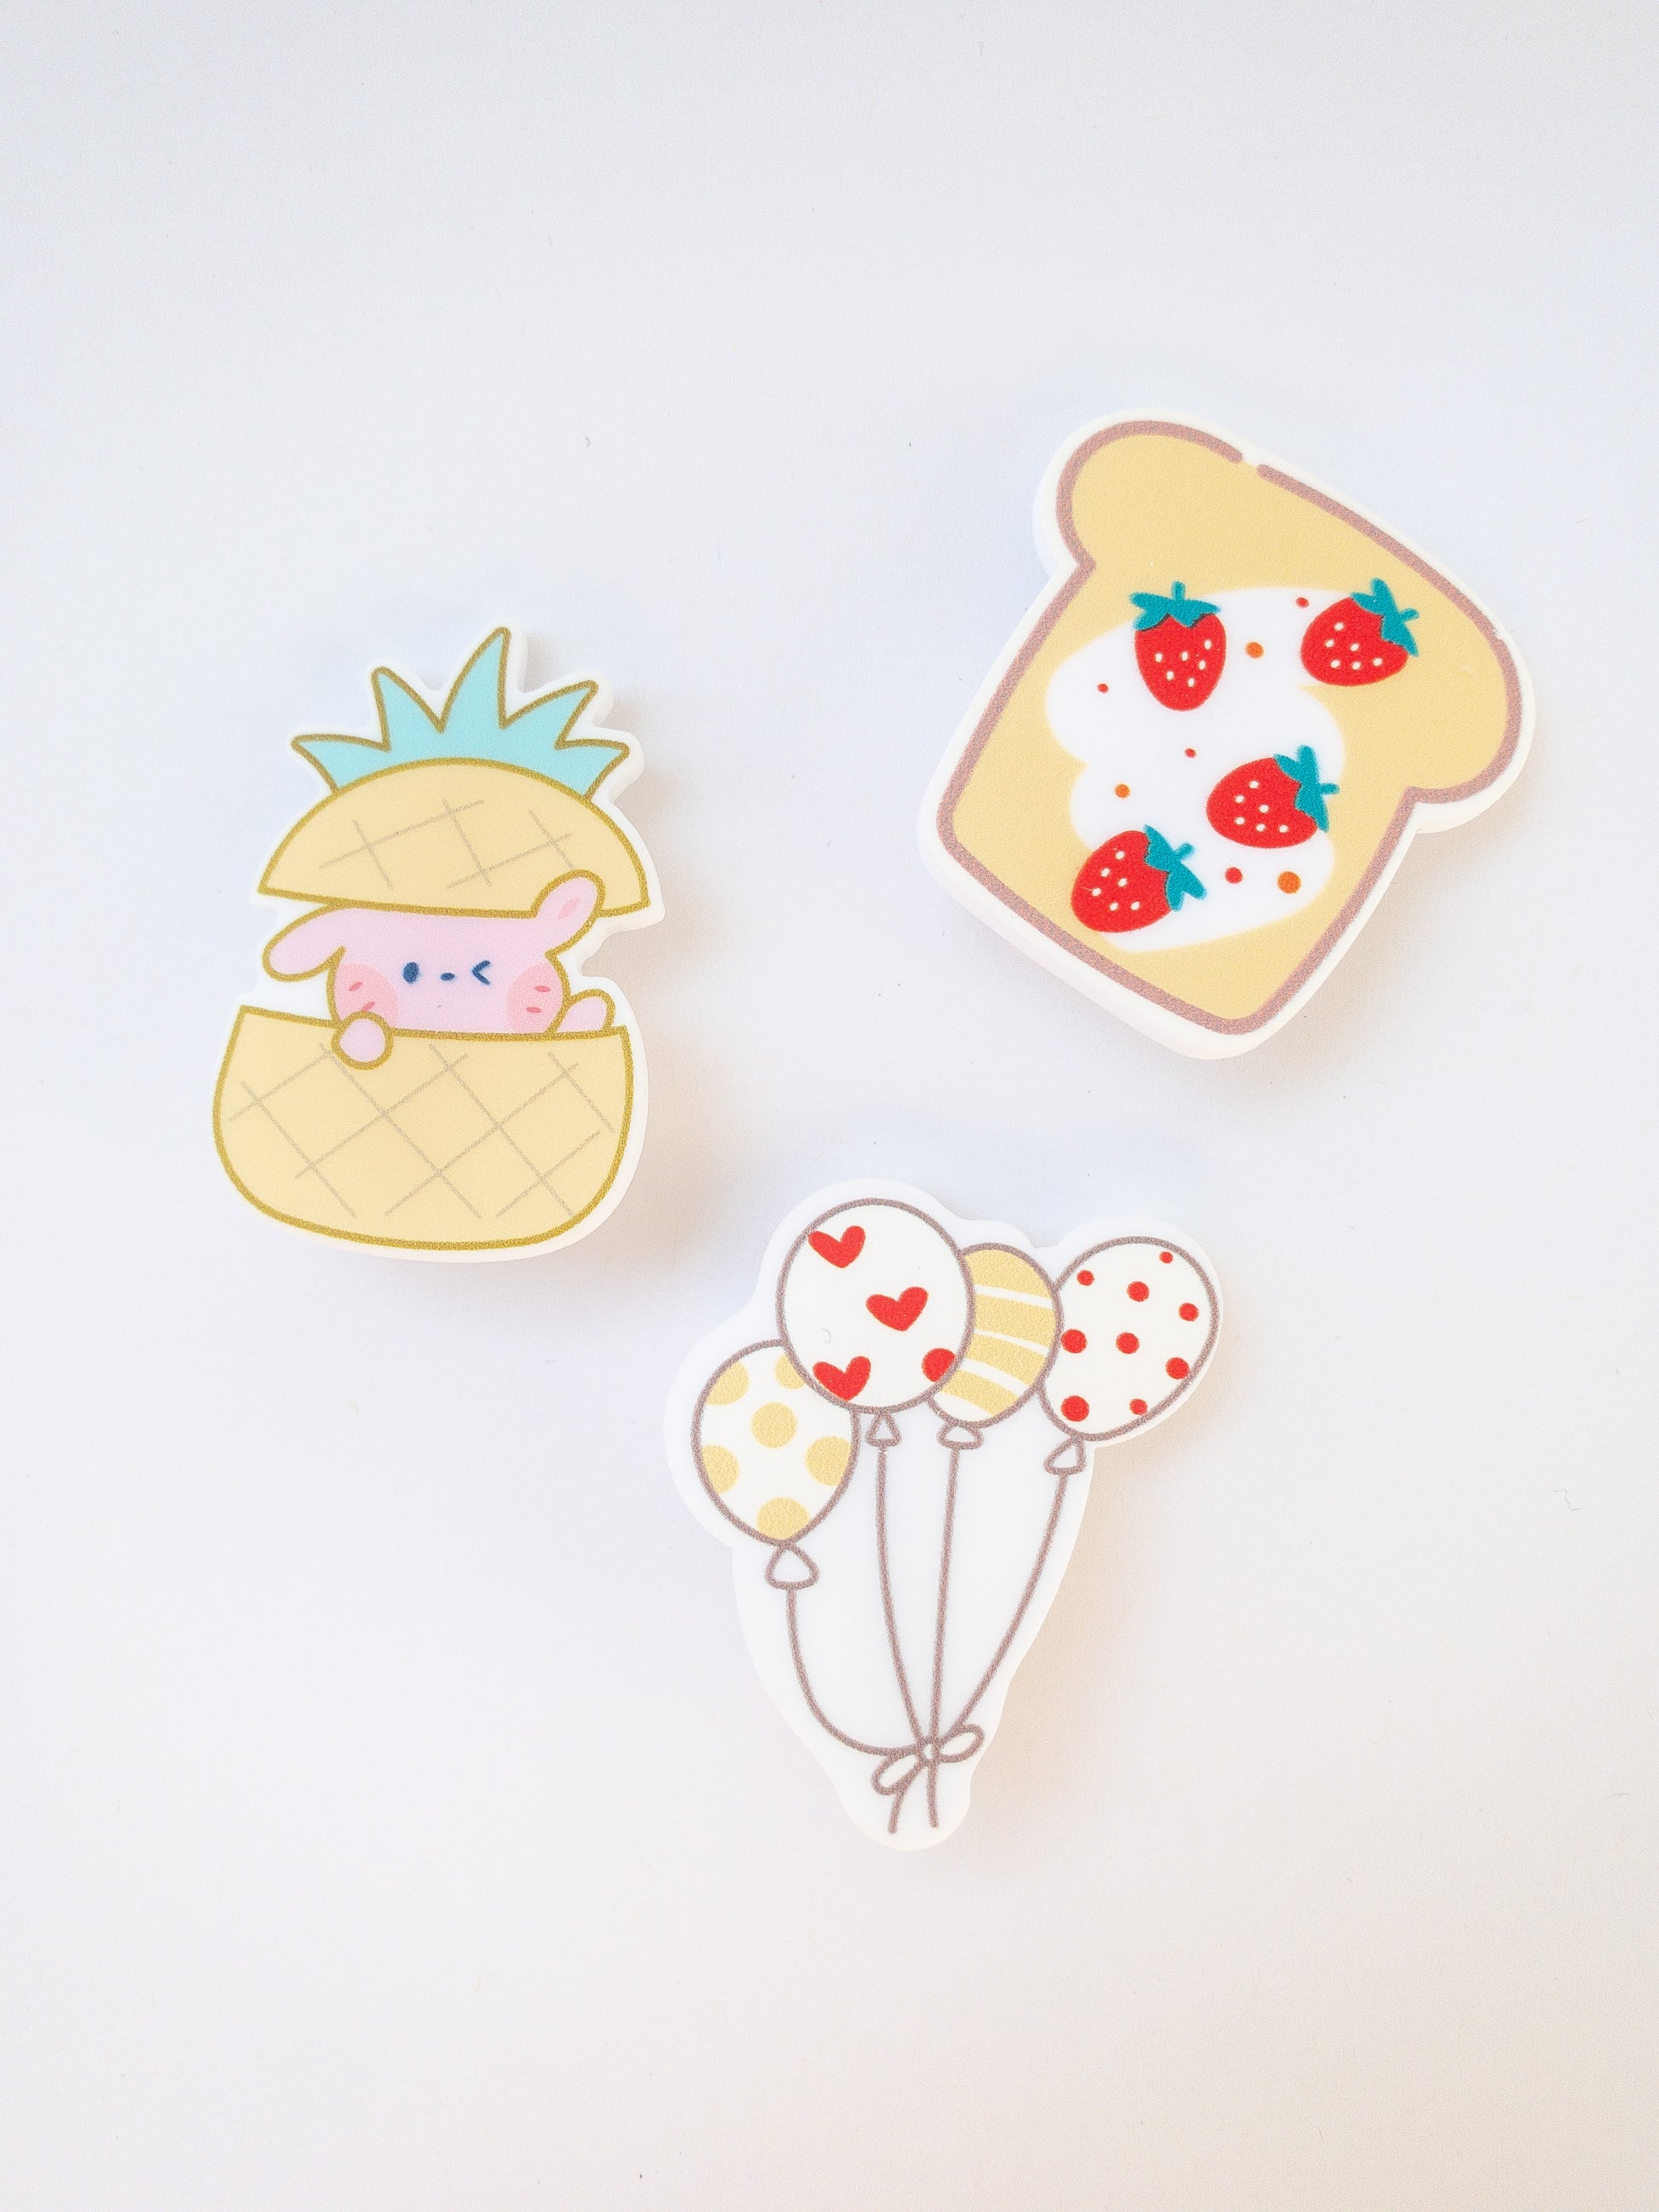 A set of 3 yellow hair clips in the sweetest shapes. A little pink bunny hidden inside a pineapple, a set of balloons, and a delicious strawberry toast.  Gold alligator clips